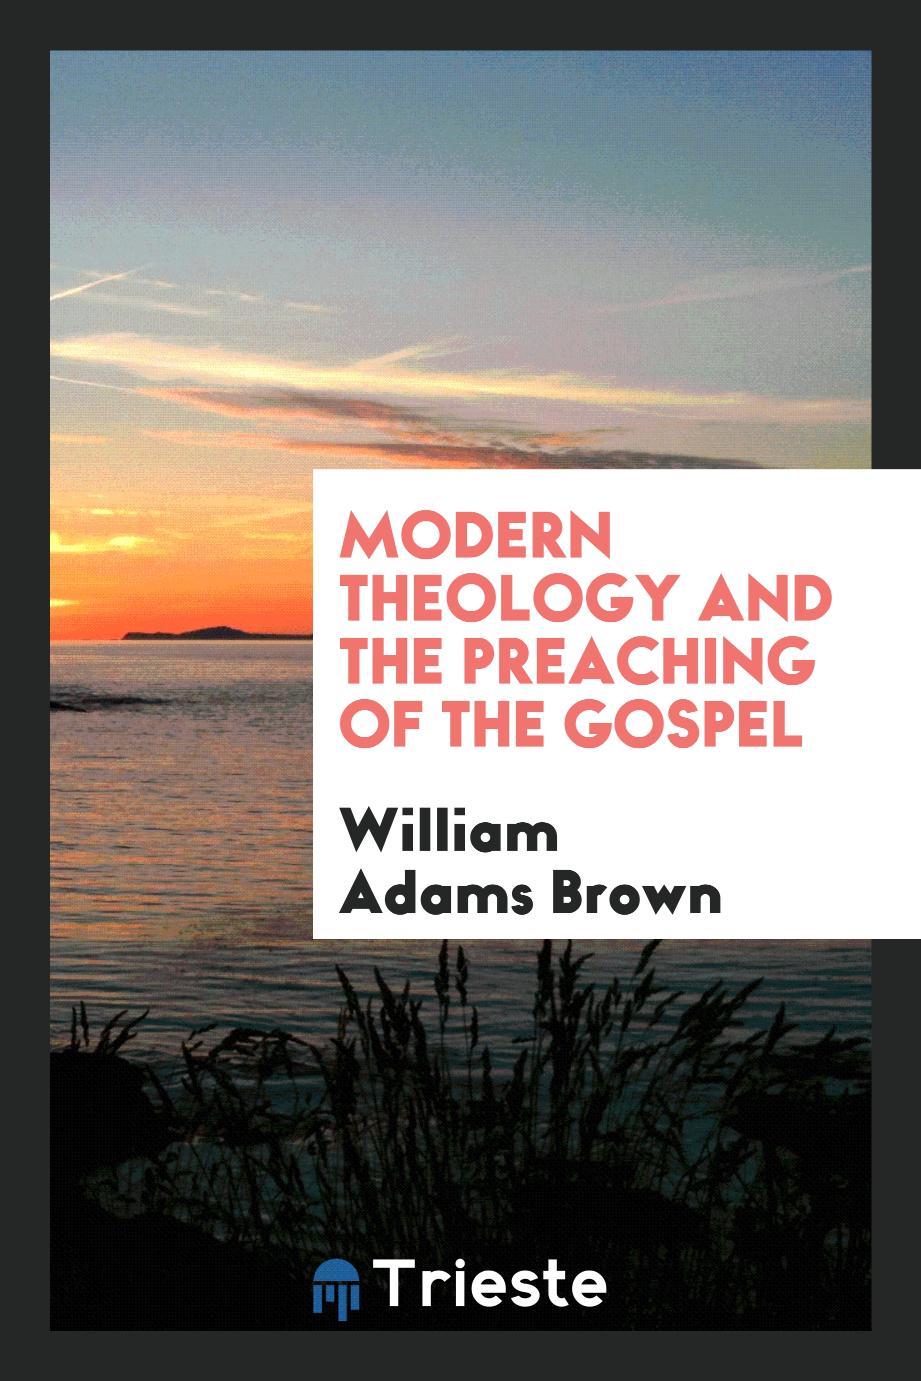 Modern theology and the preaching of the gospel